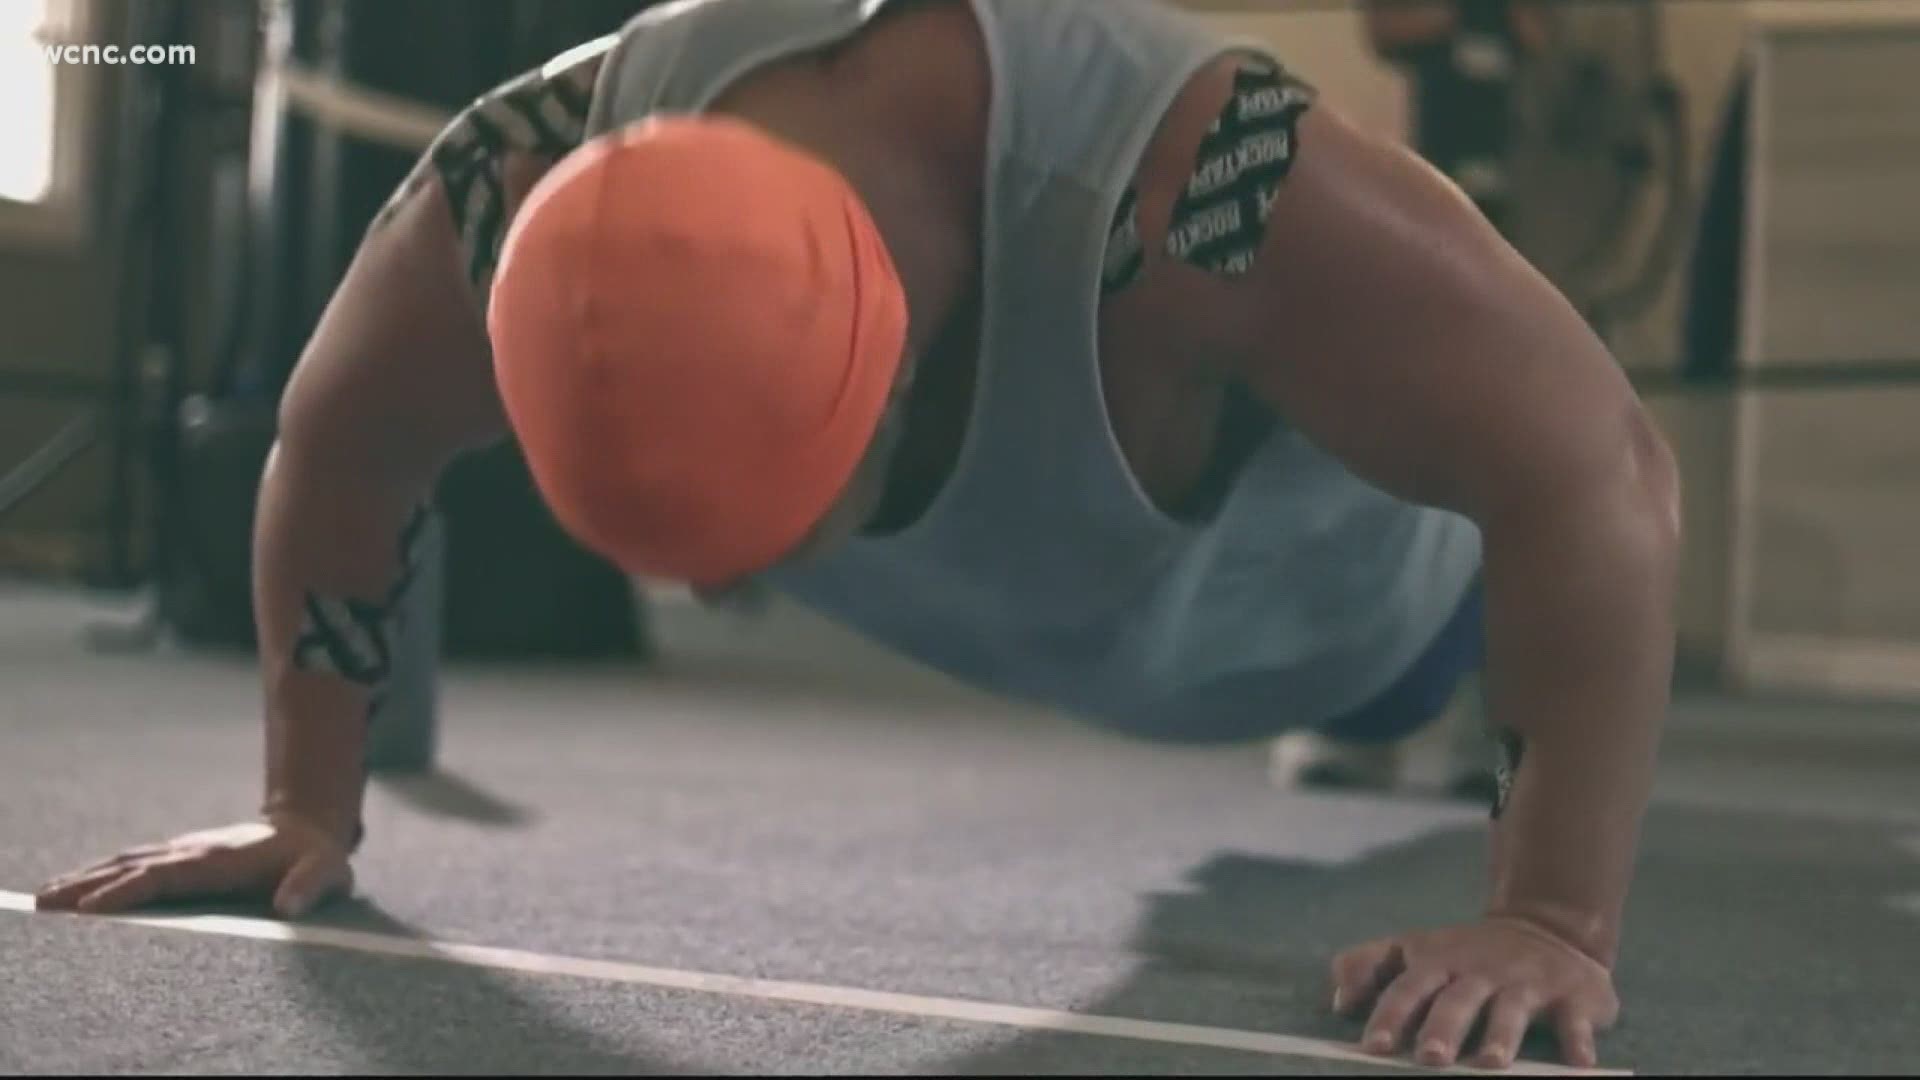 The previous one-hour push up record was 2,900. Saturday morning, he shattered that record.